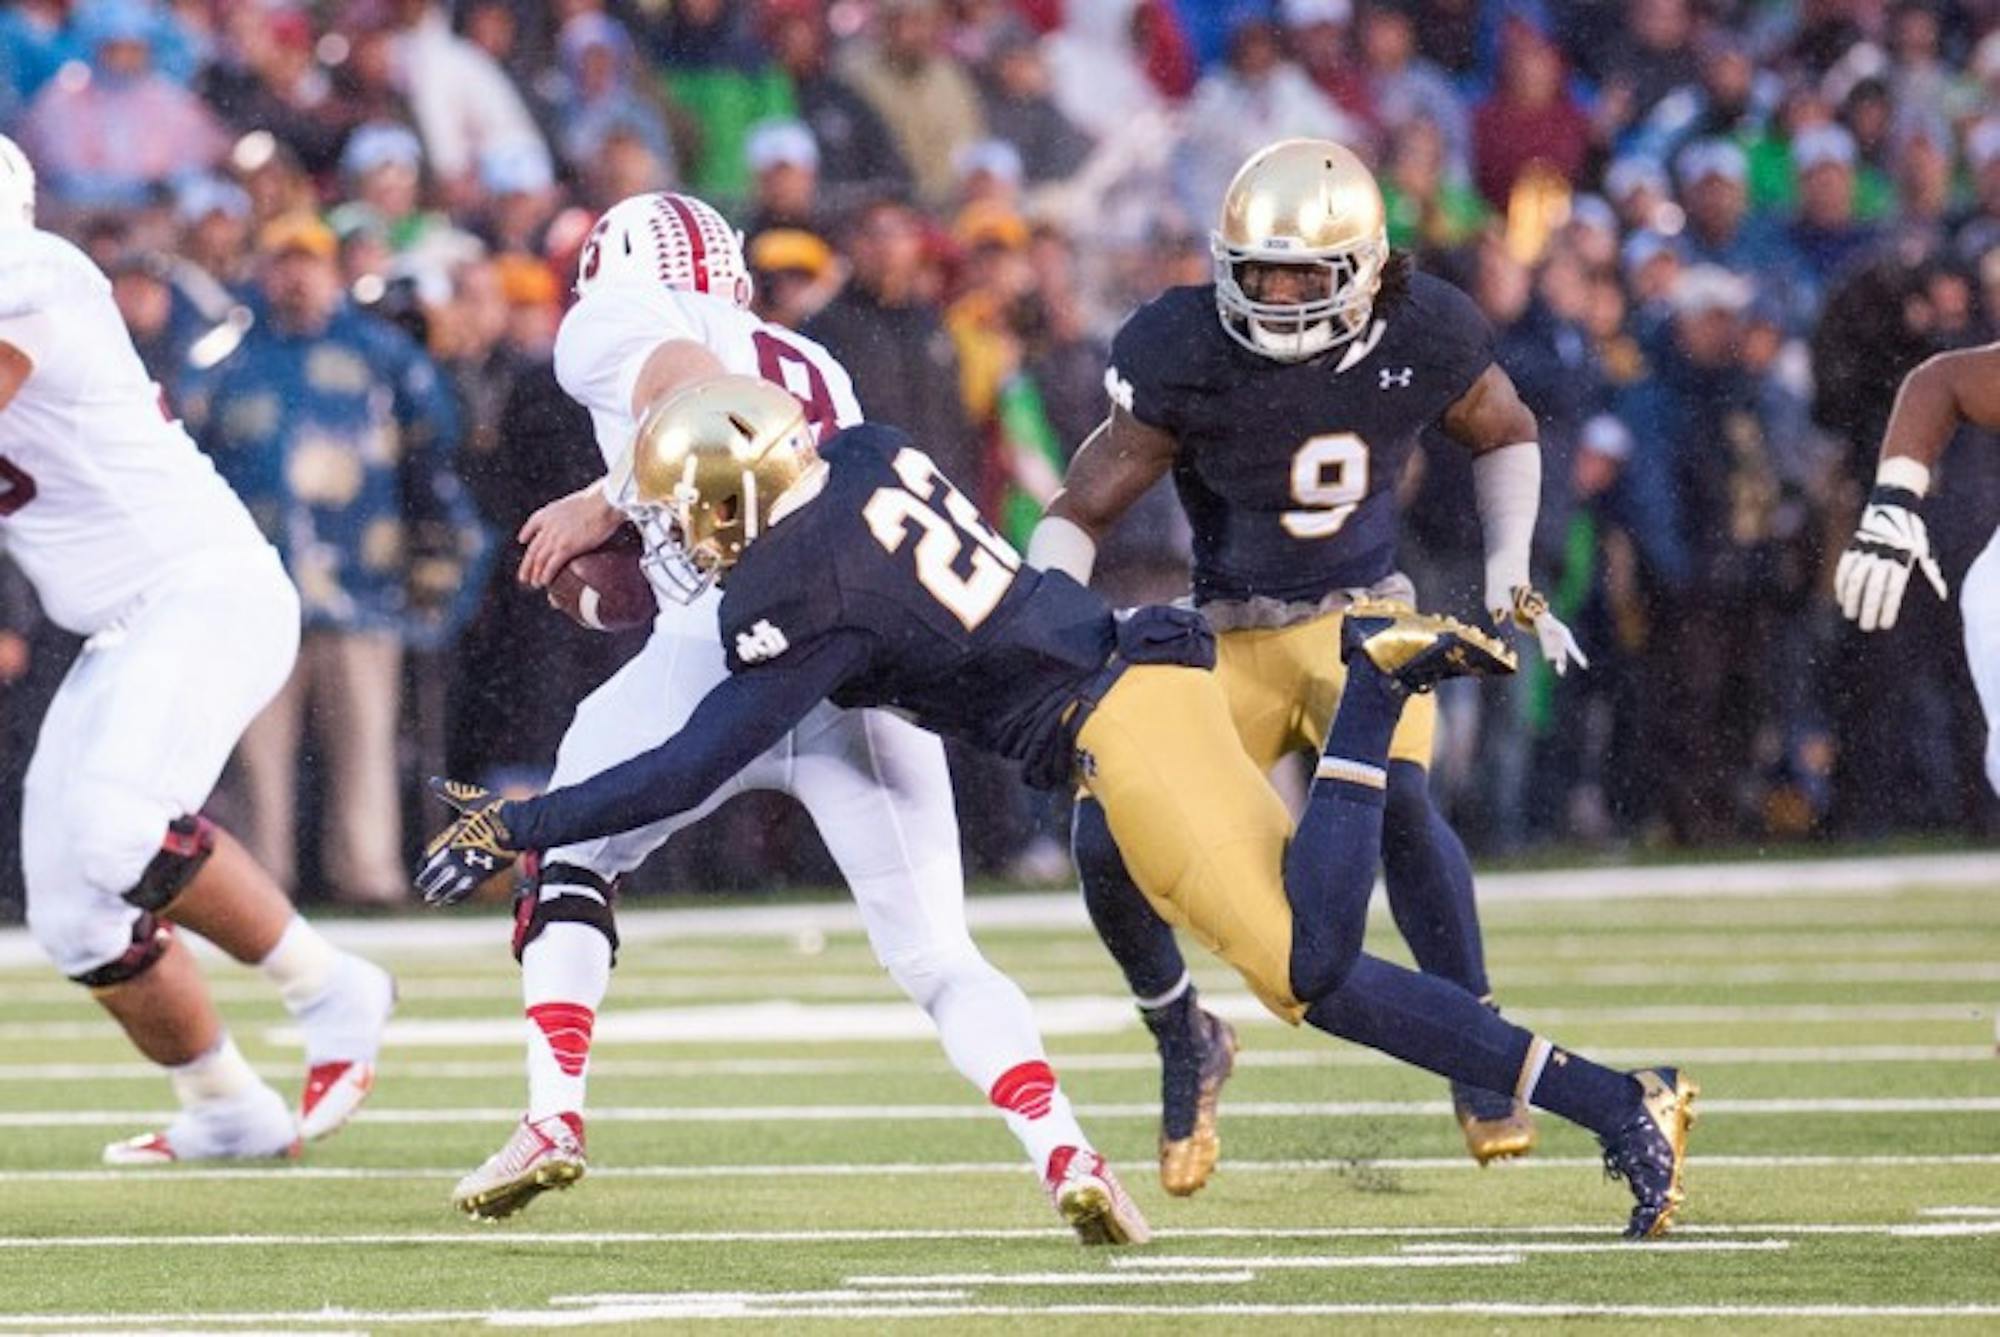 crop 2, 20141004, 2014-2015, 20141004, Football, Kevin Song, Notre Dame Stadium, Schumate, Smith, vs Stanford